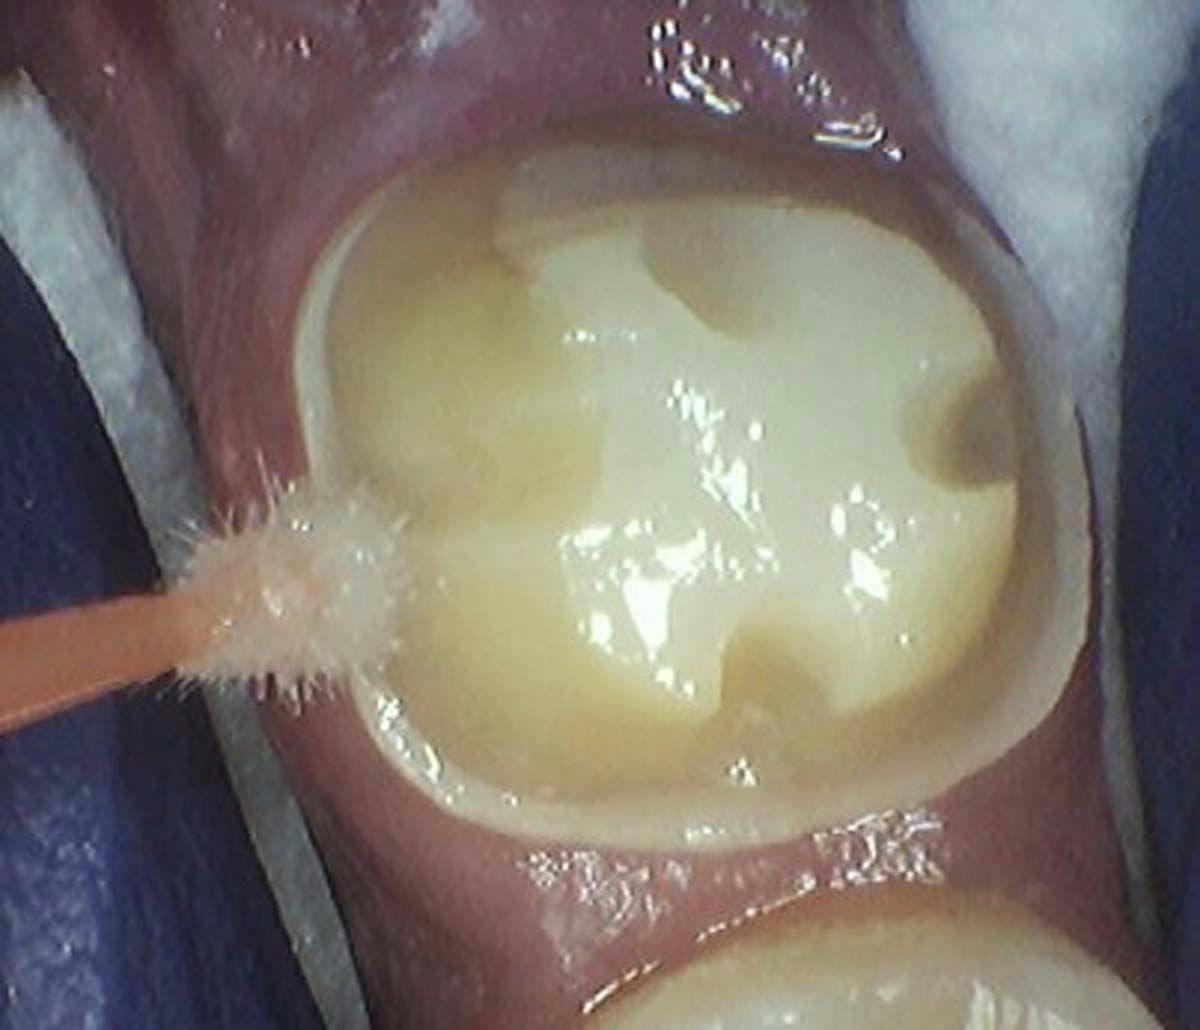 Leaving the Hemaseal & Cide slightly moist, the tooth is ready for bonding or cementation (Figure 3). 